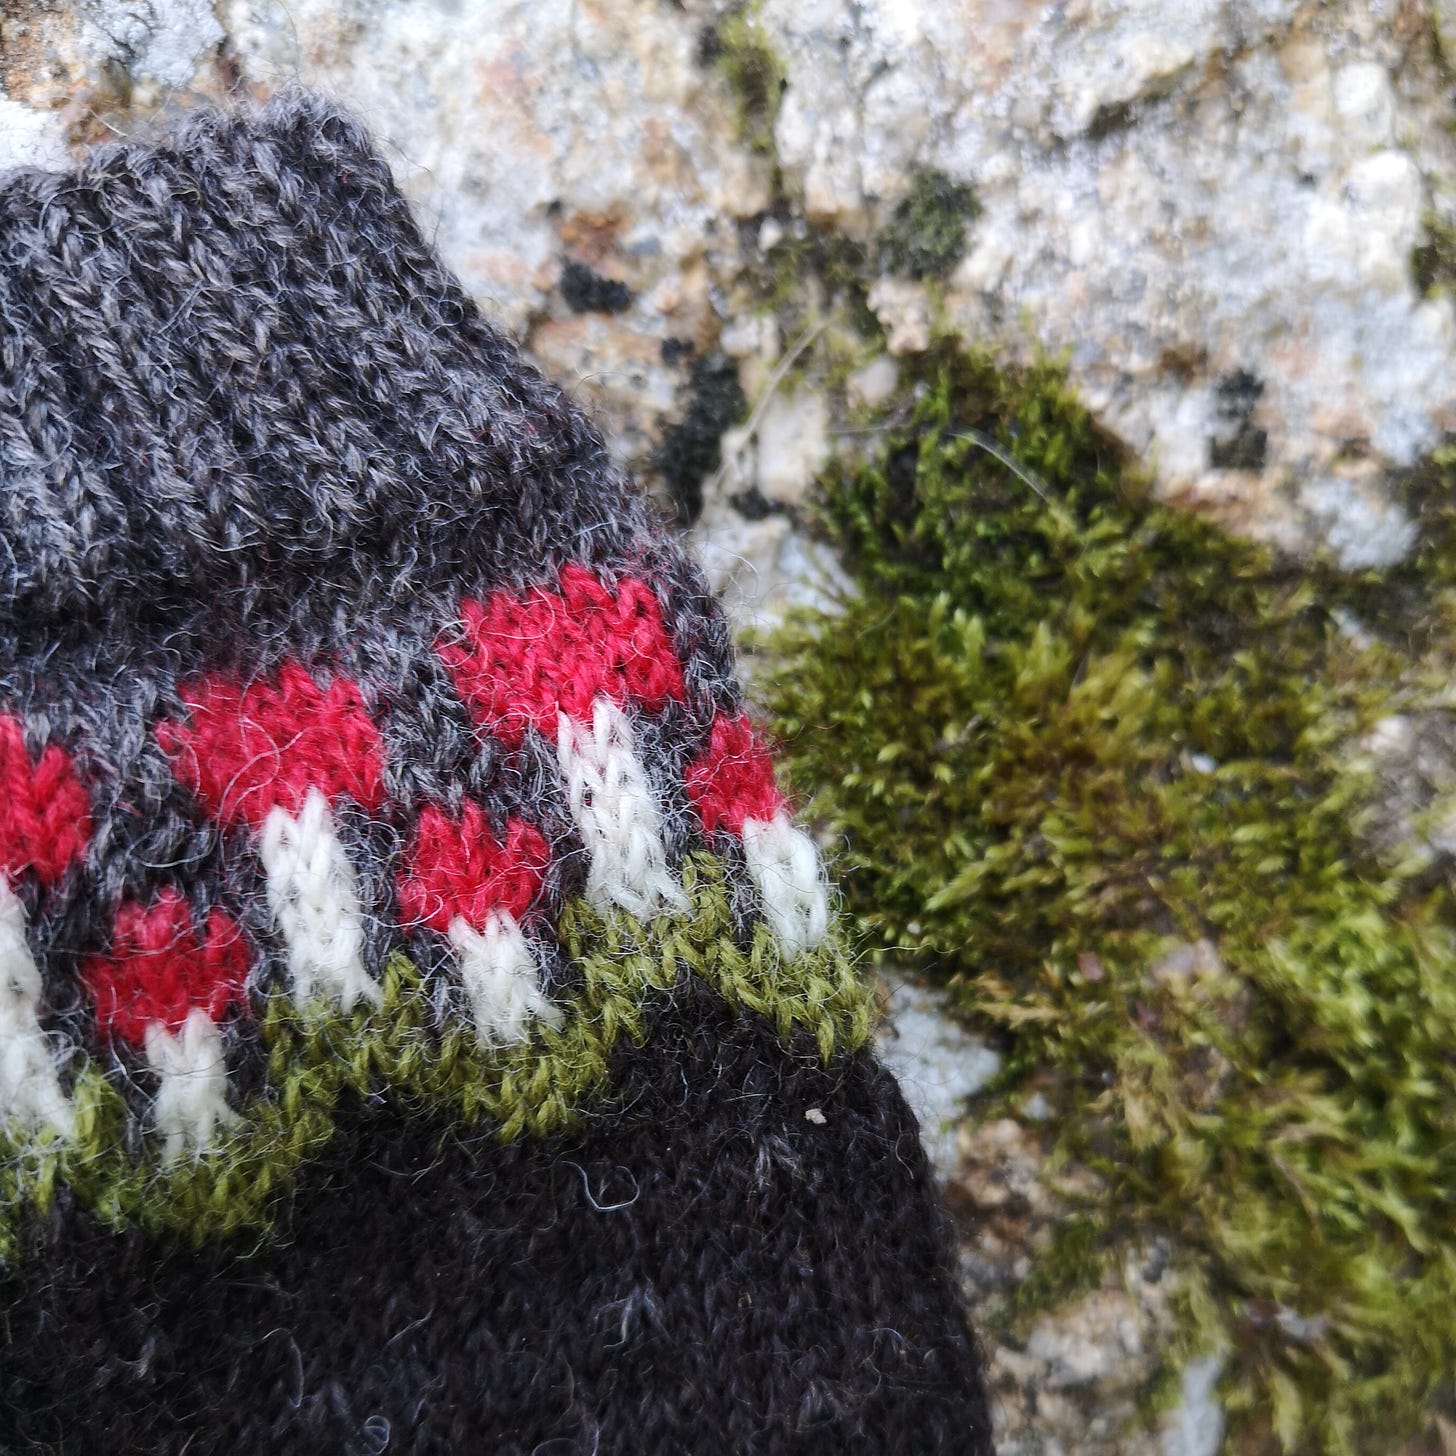 Image description: a close up photo of a knitted sock on a mossy rock. The top ten centimetres or so of the sock are shown, with a ribbed cuff in mid grey, some tiny colourwork red and white mushrooms, a zig zag of green and the a dark brown main sock.